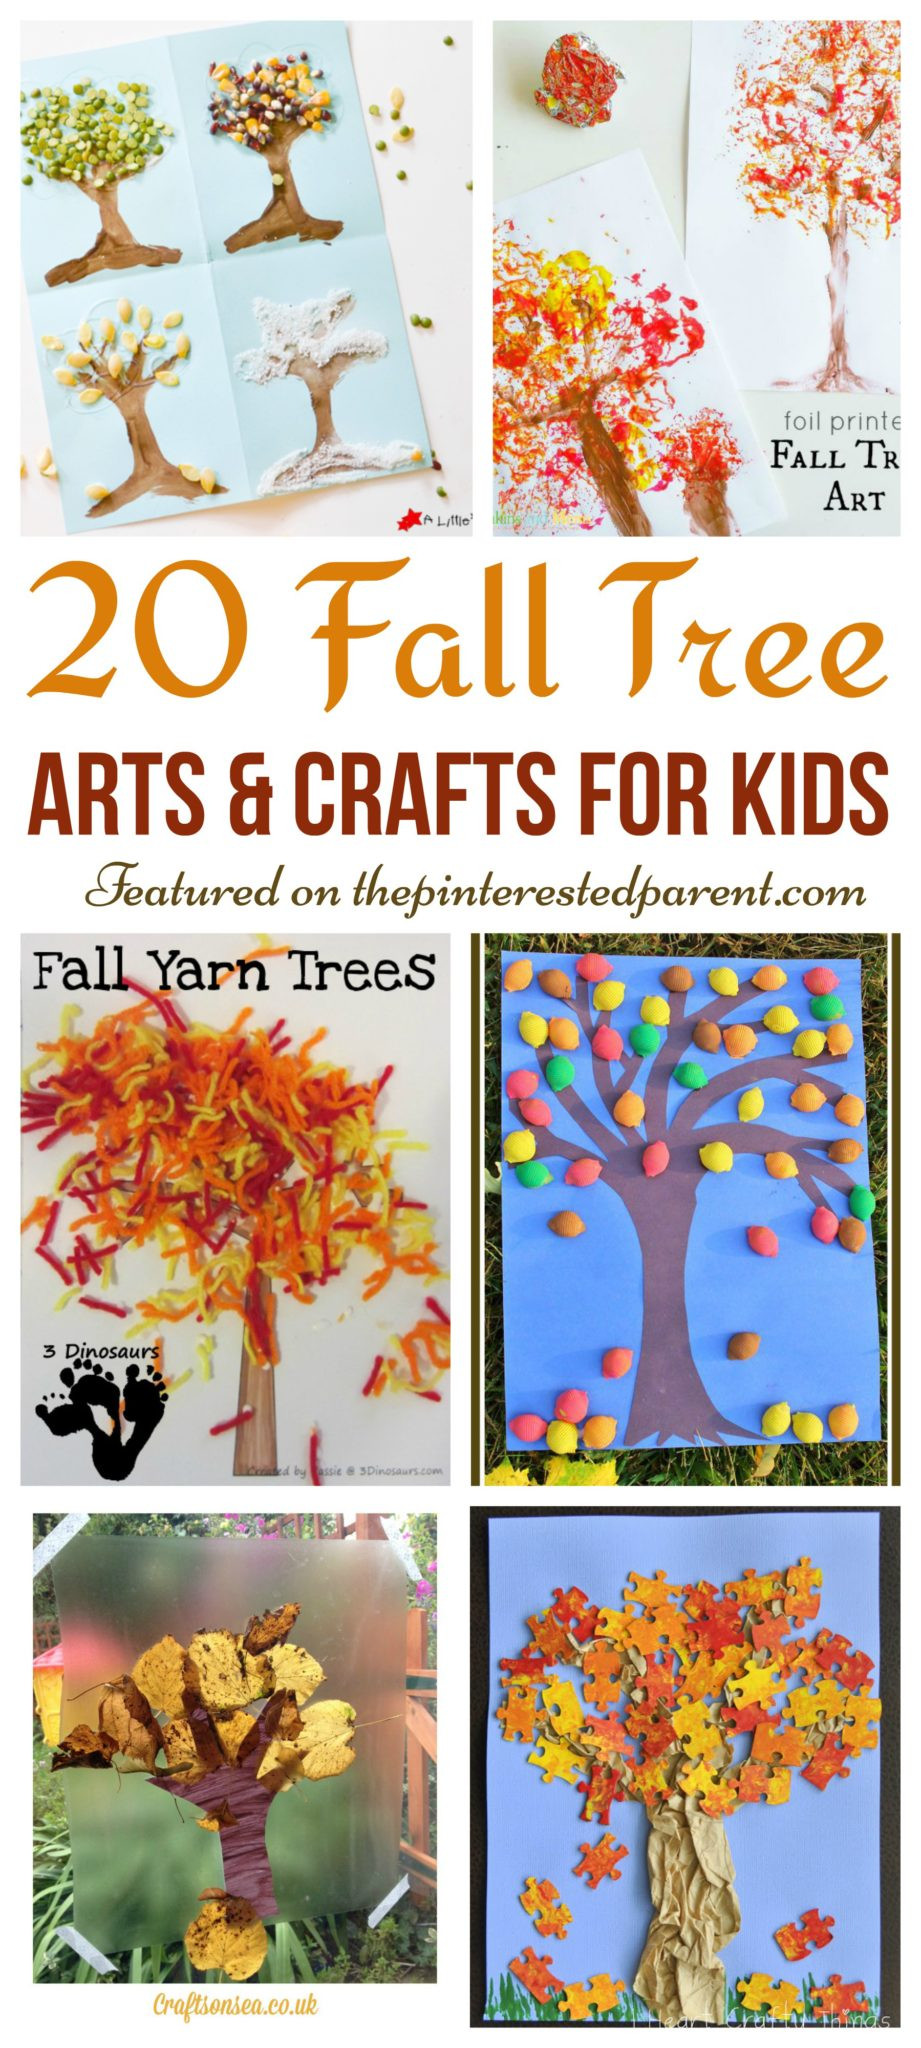 Fall Art Project For Kids
 20 Fall Tree Arts & Crafts Ideas For Kids – The